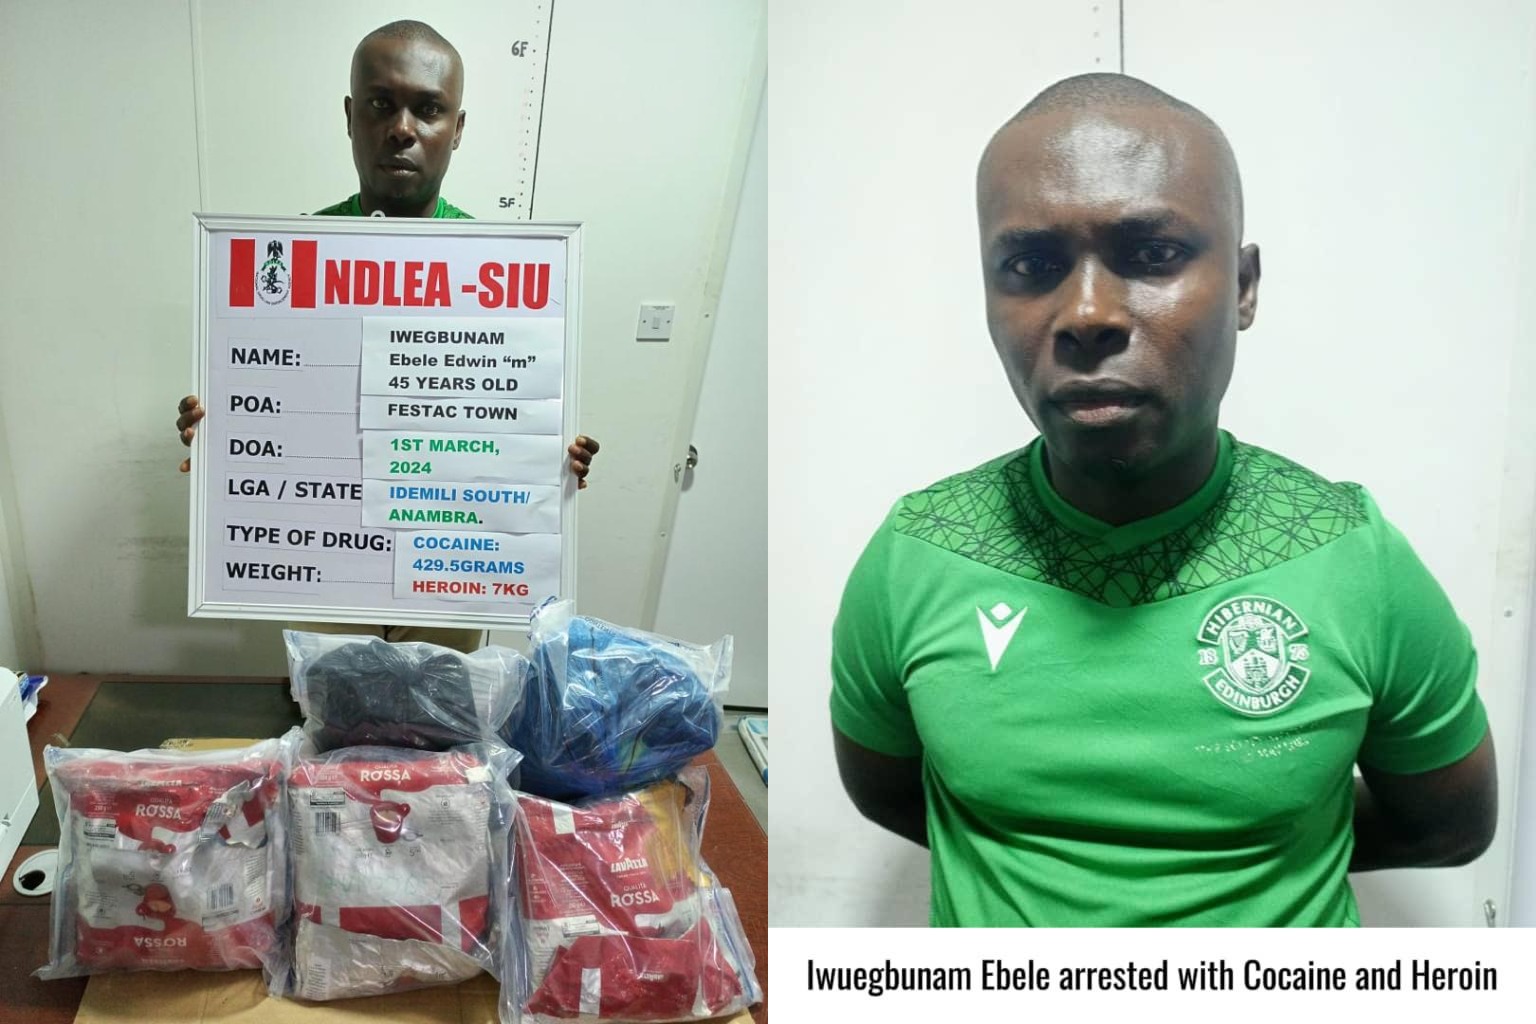 NDLEA intercepts Vietnam-bound businessman with cocaine consignment at Abuja airport; arrests drug cartel members in Lagos with 17.4kg cocaine, heroin, meth